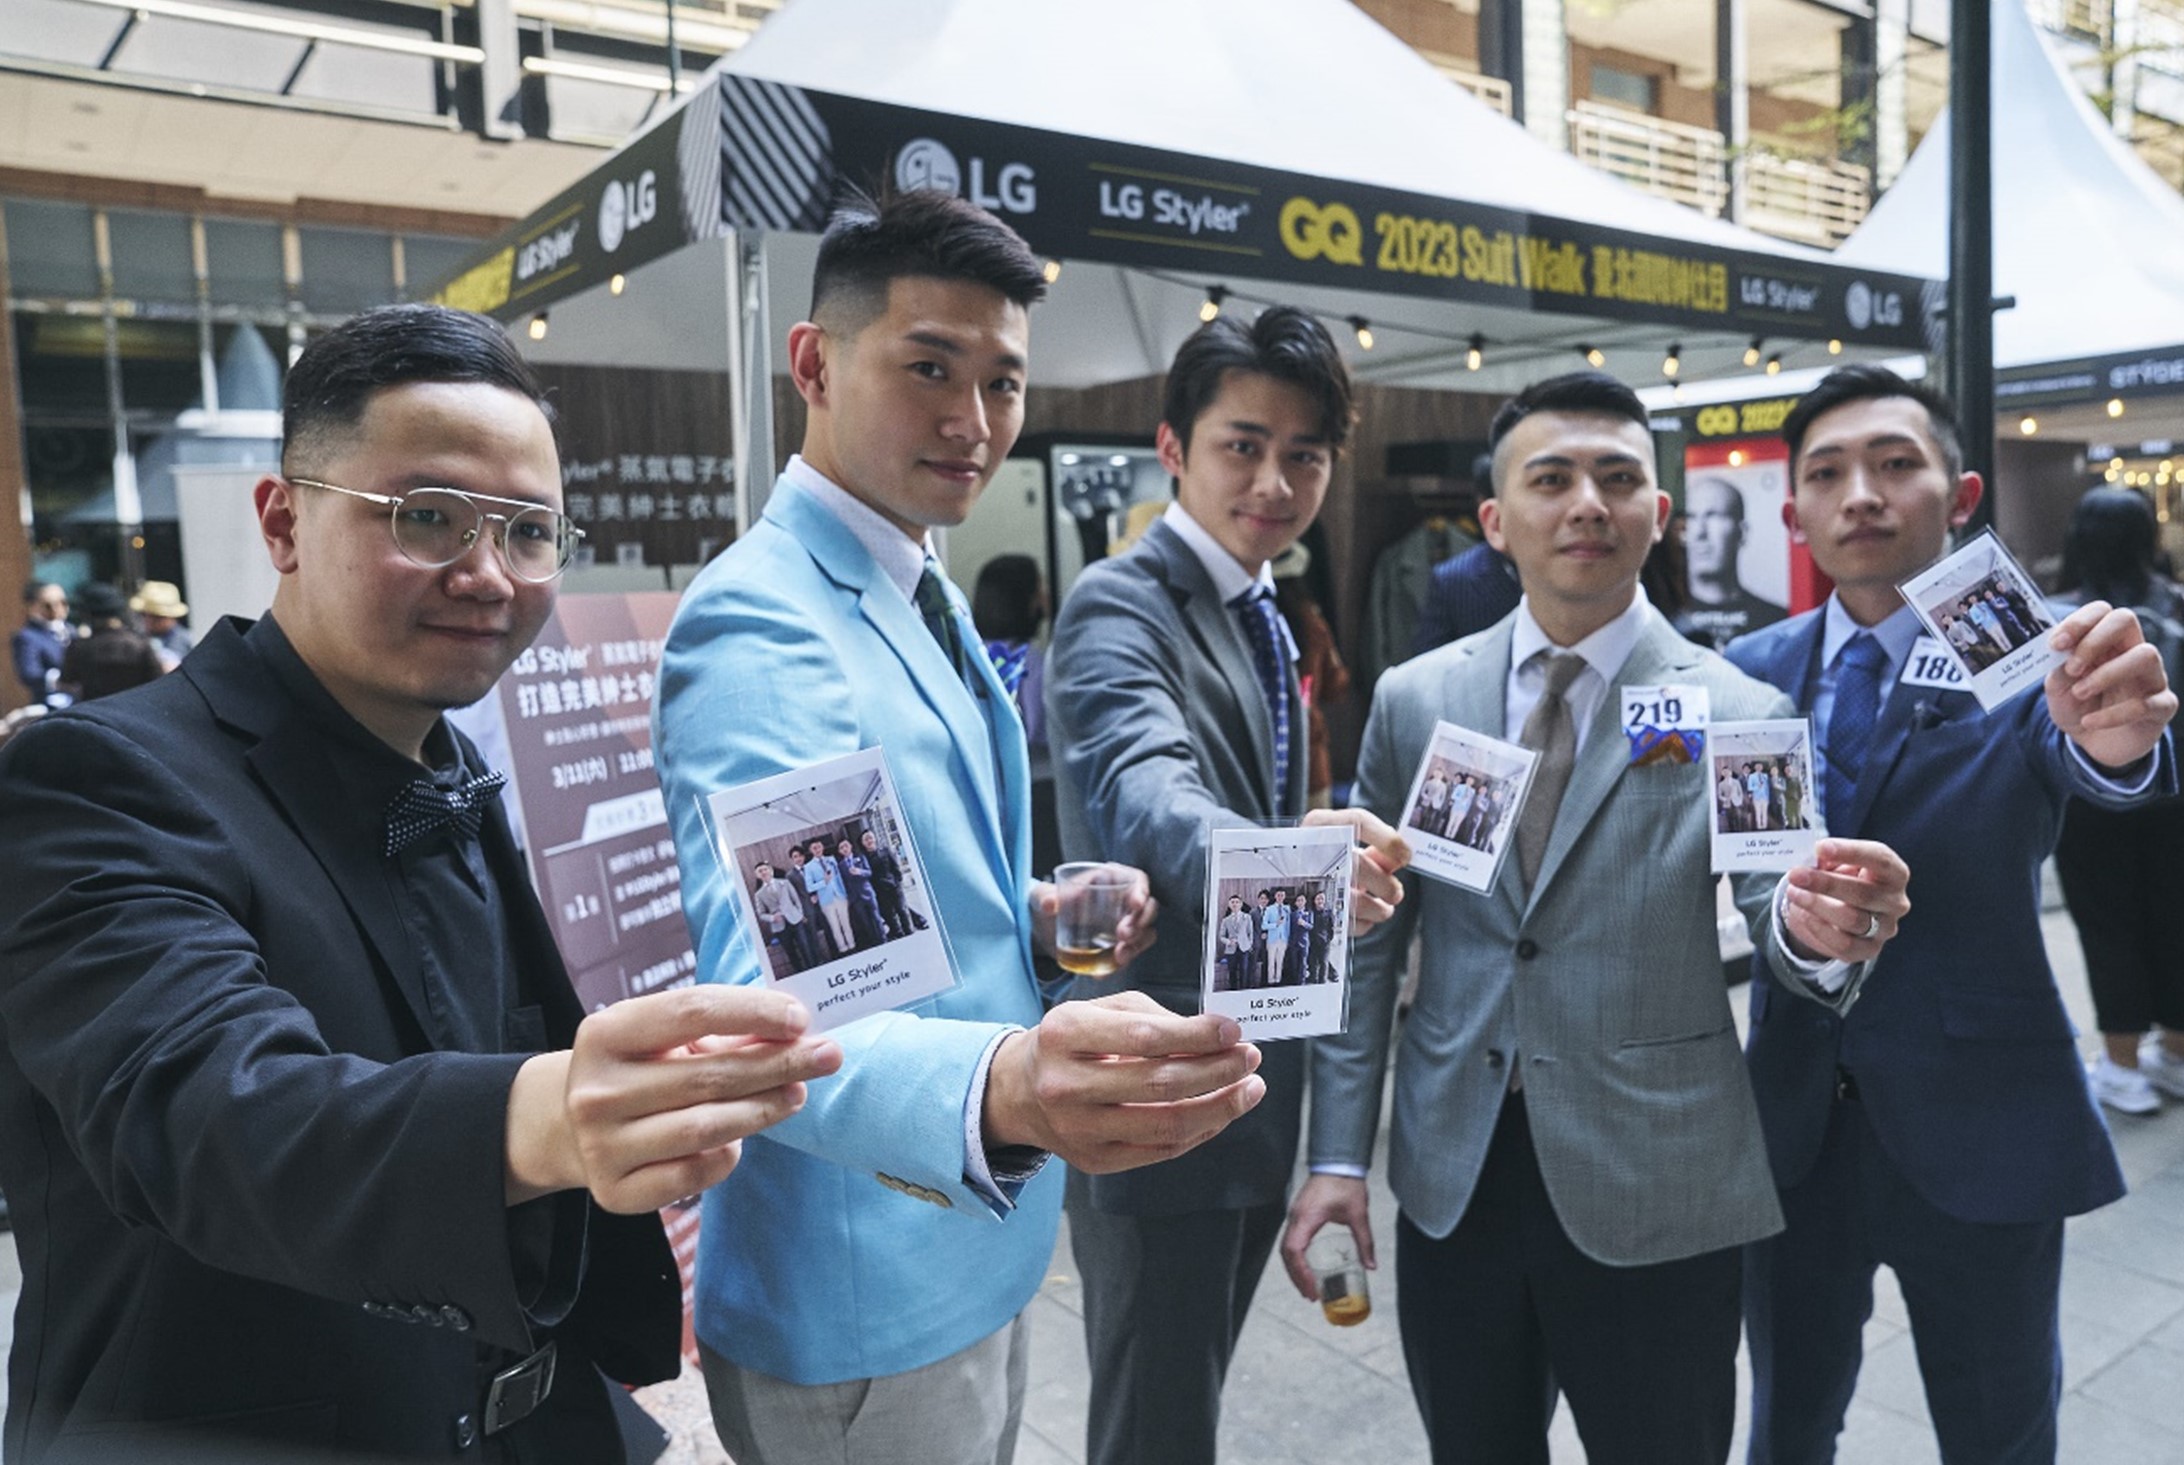 Five men posing with polaroid photos in their hands which was taken as an event at LG booth